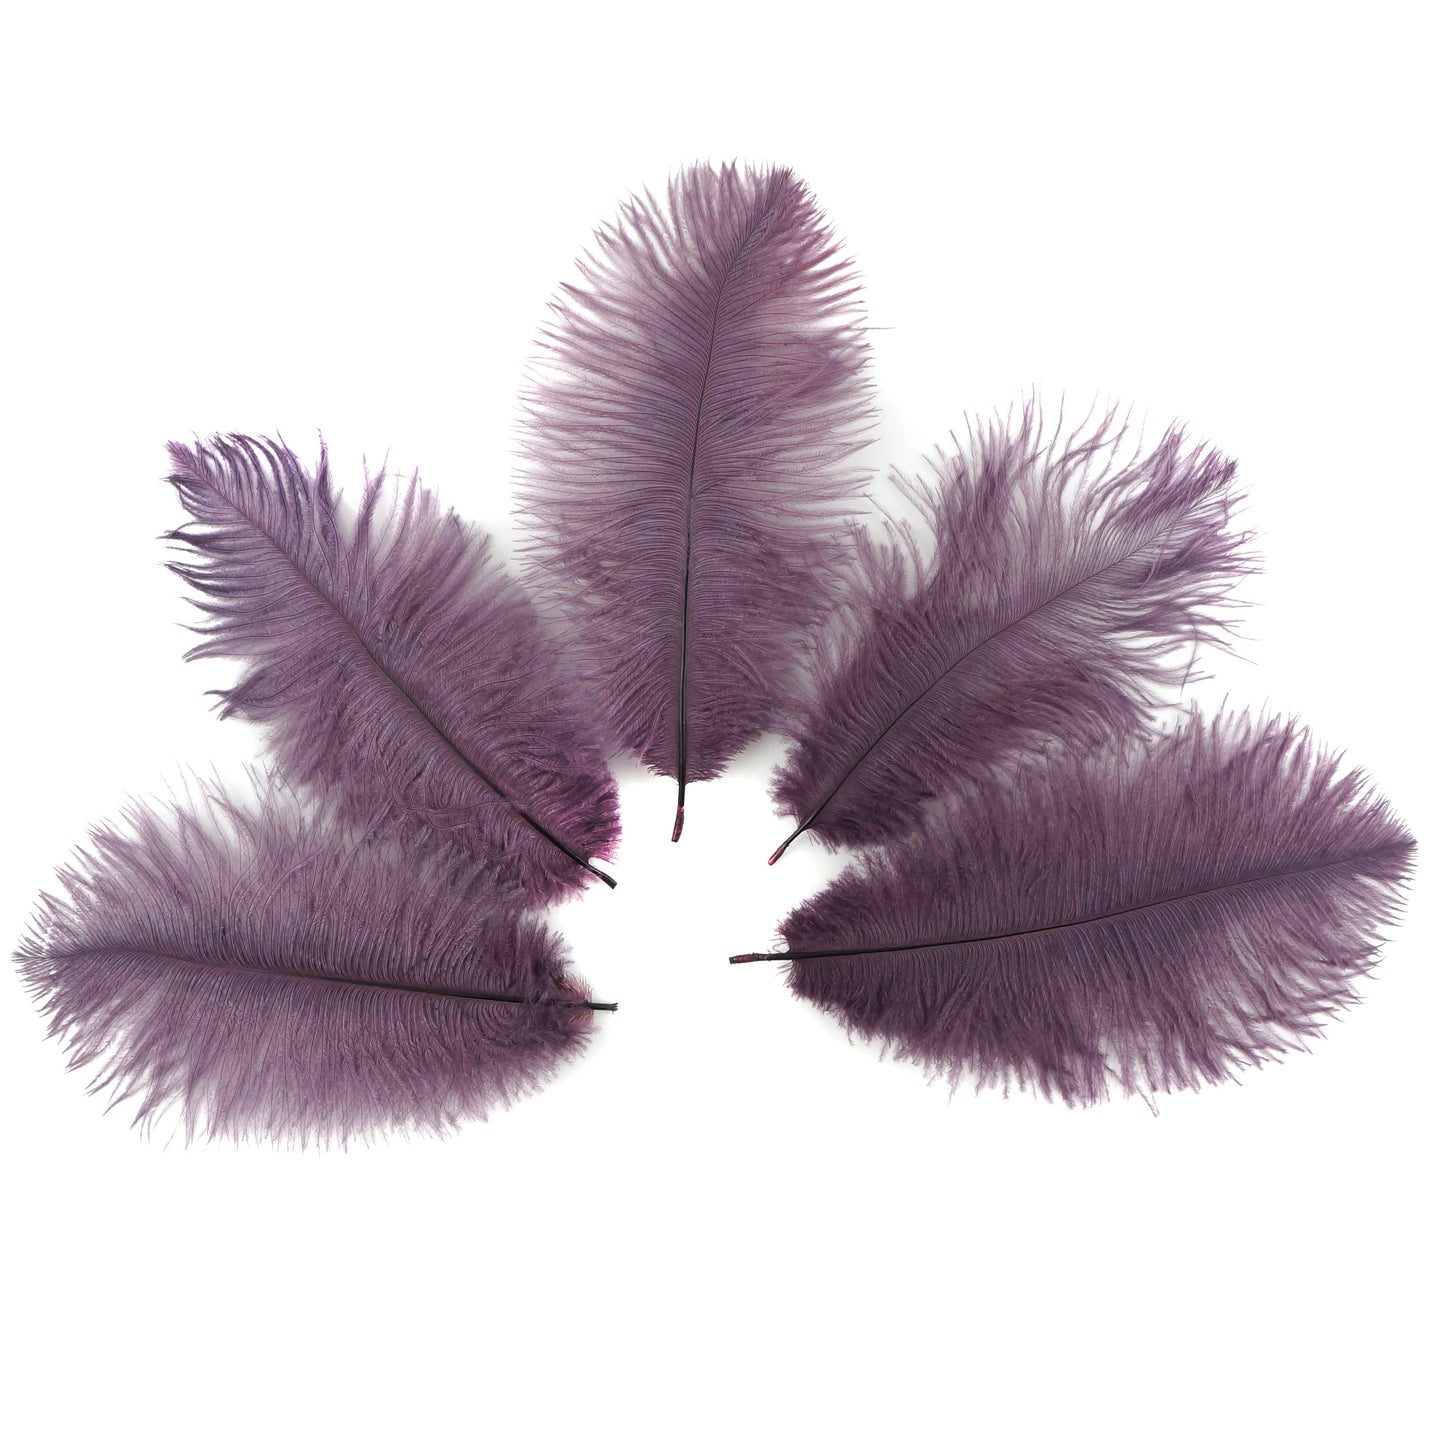 Ostrich Feathers 4-8" Drabs - Amethyst